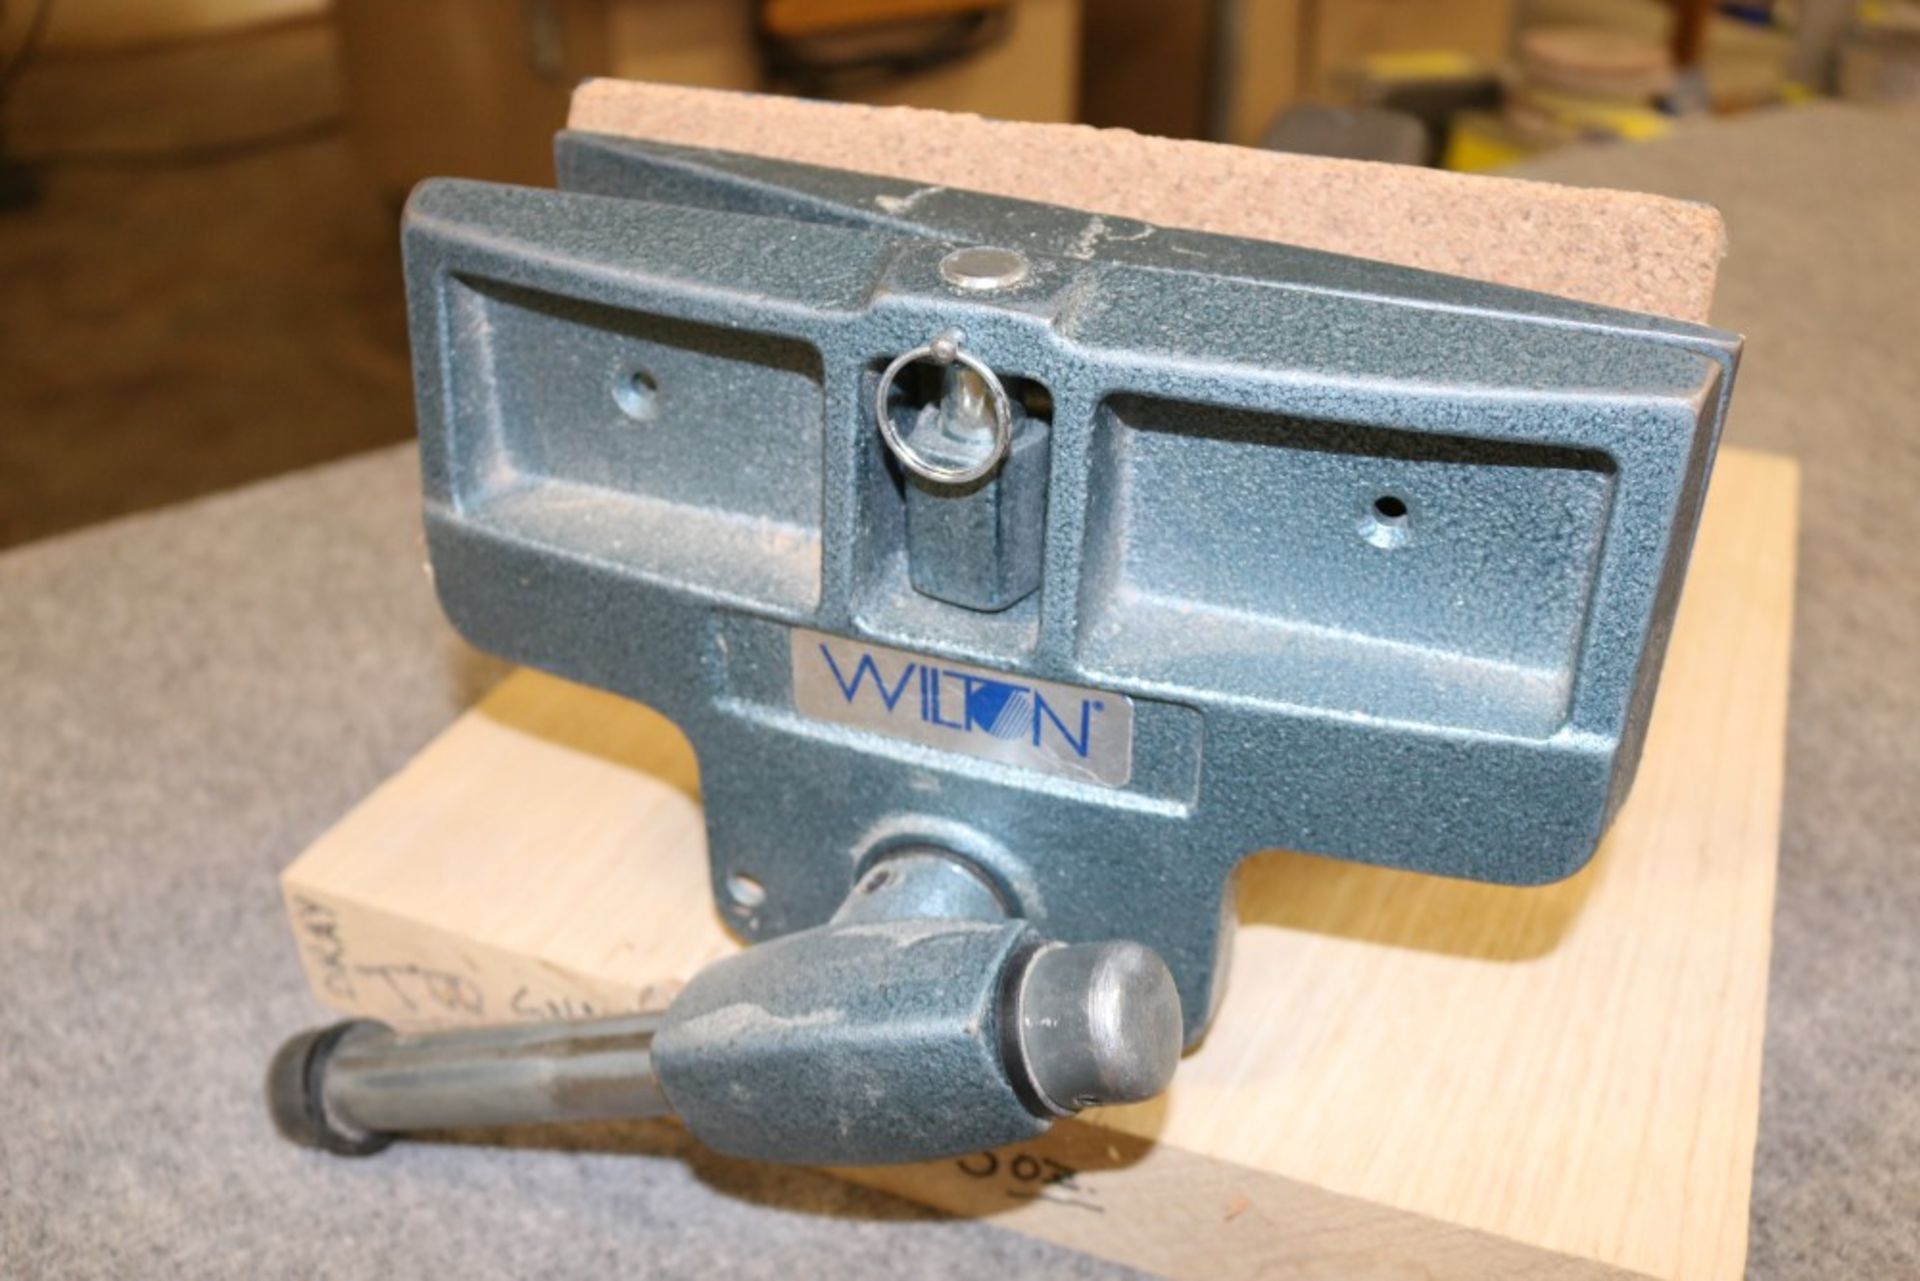 Wilton 10" Heavy Duty Vise and 4" Table Top 90 Degree Swivel Vise - Image 2 of 7